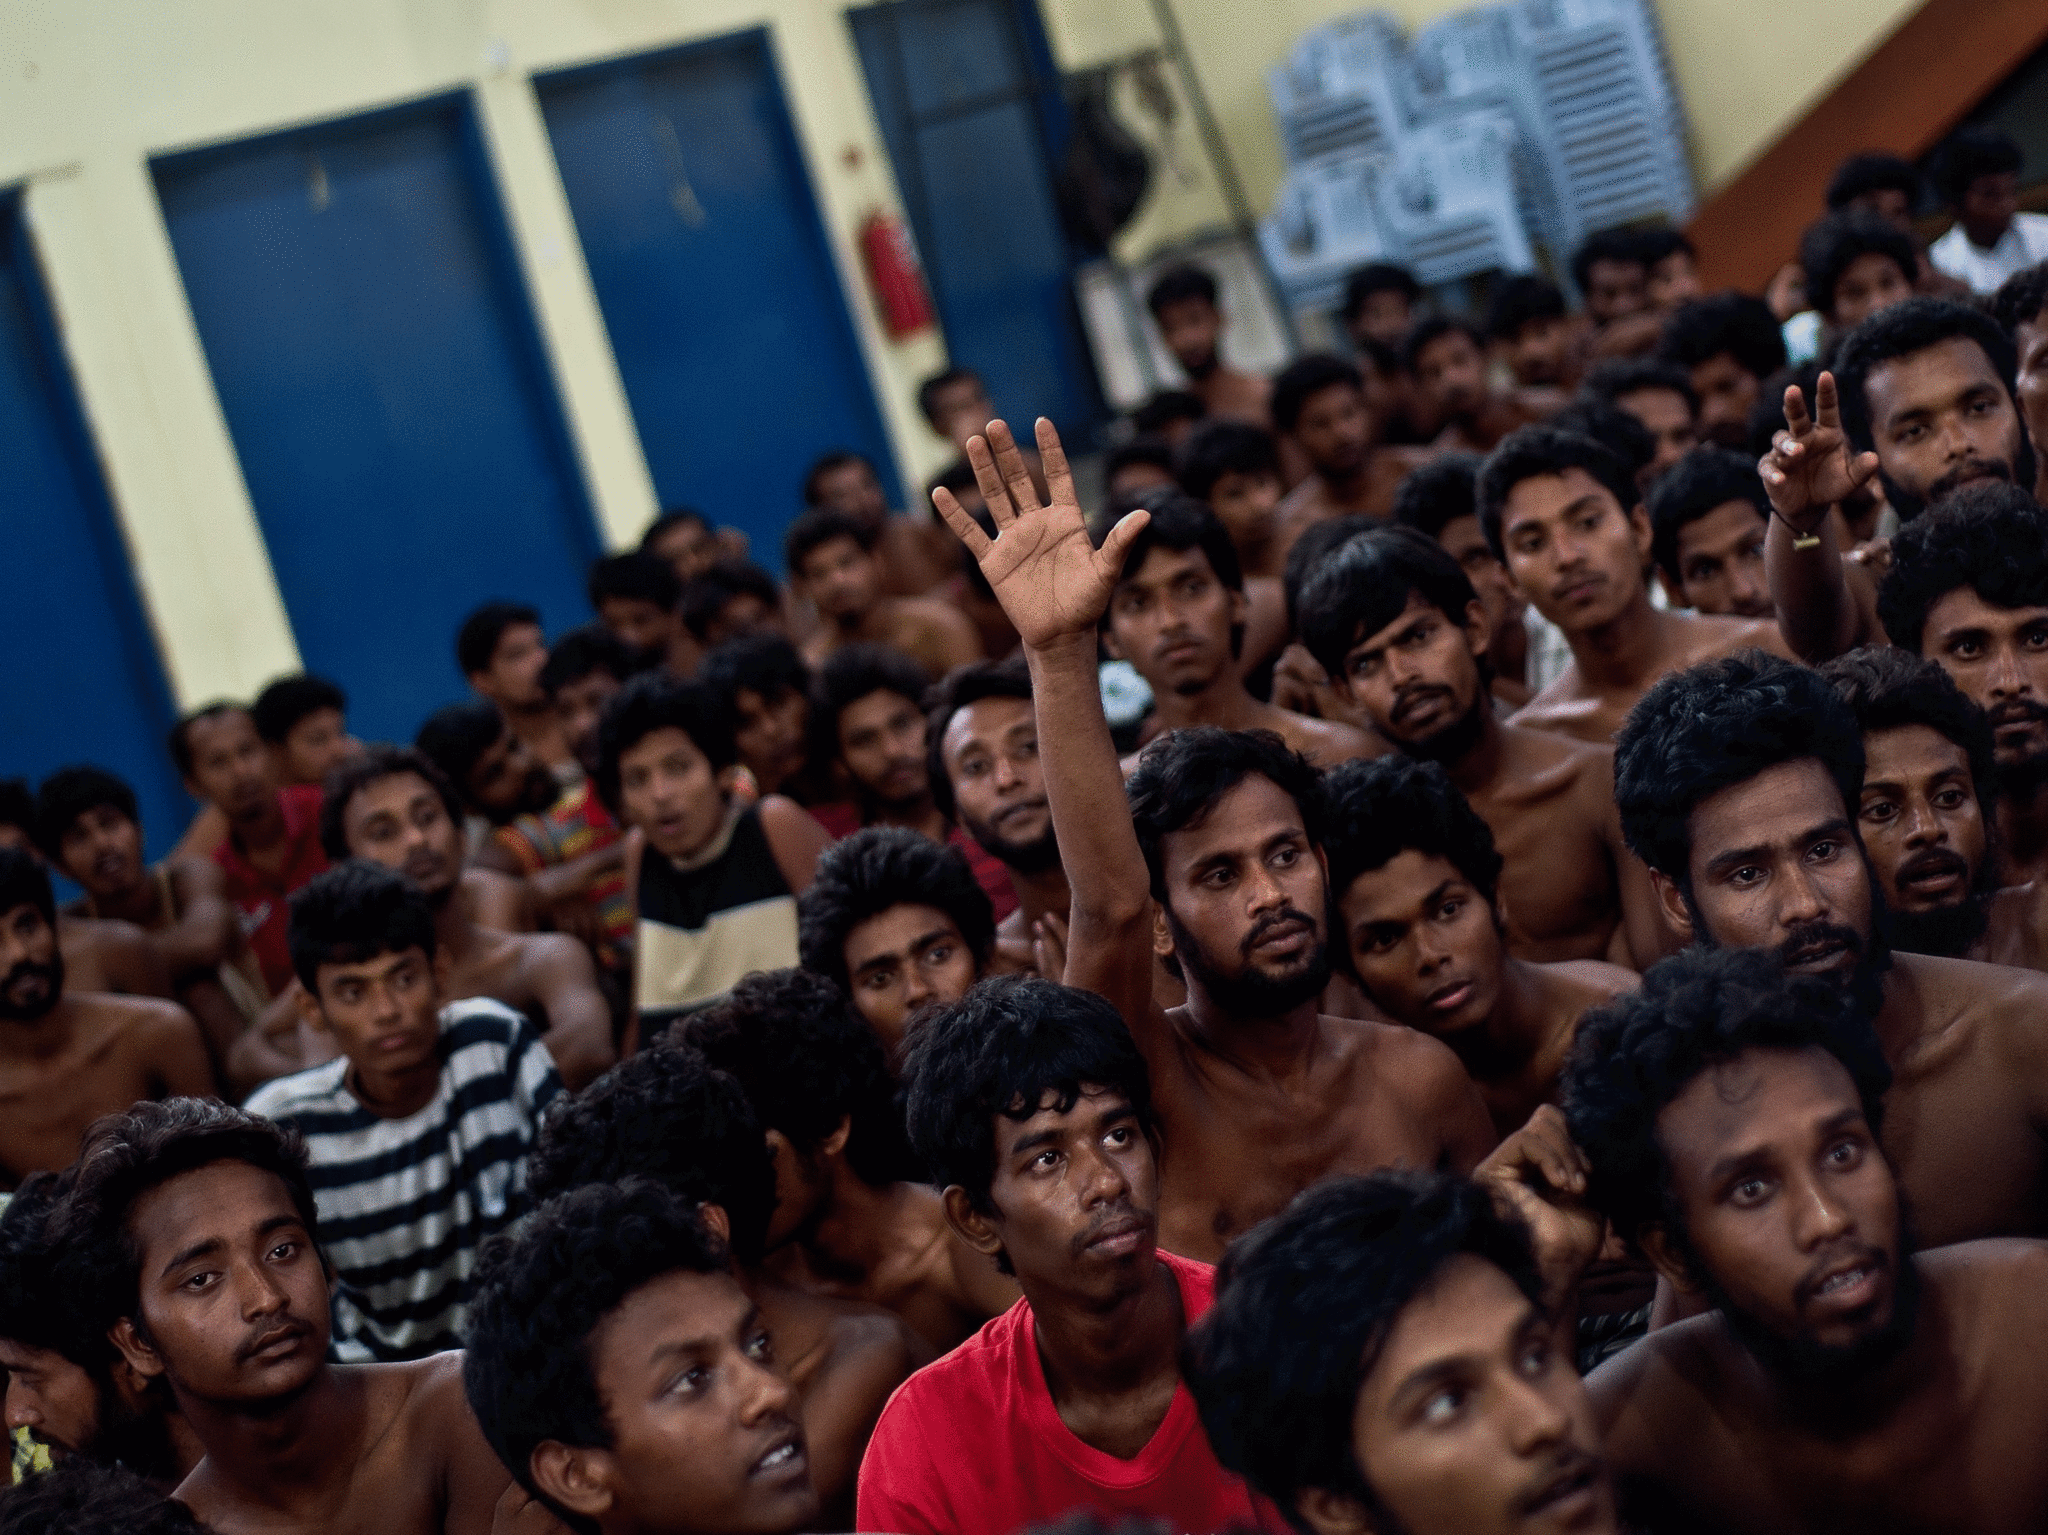 An illegal Bangladeshi migrant raises his hand for clothes as they wait at the Police headquarters in Langkawi on May 11, 2015 after landing on Malaysian shores earlier in the day